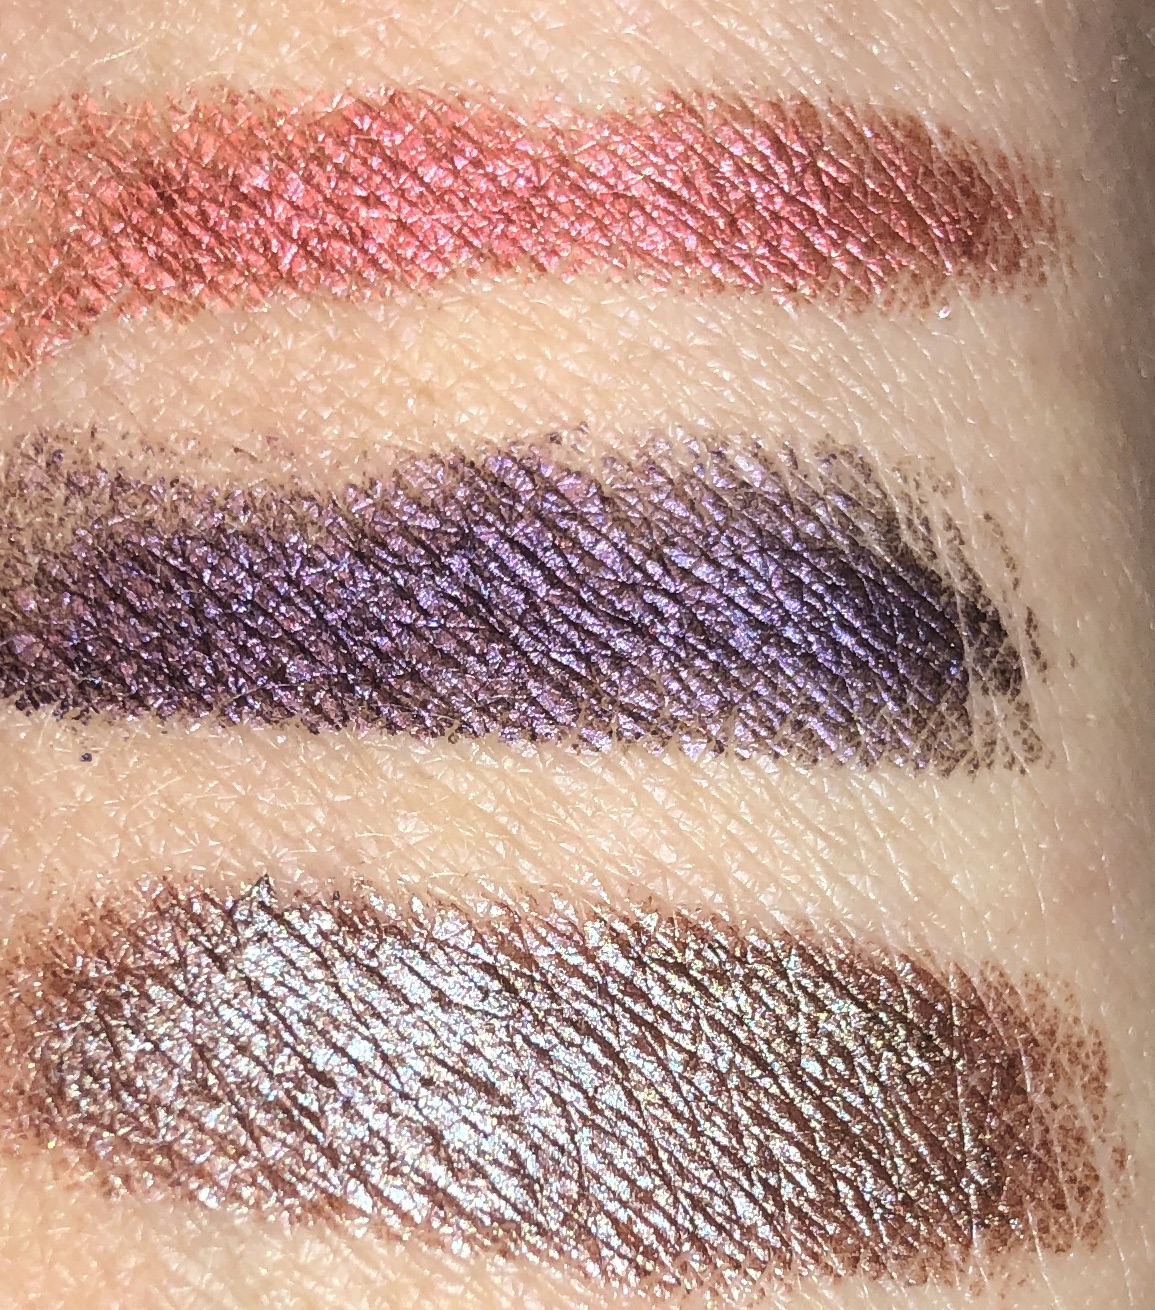 swatches top to bottom: PINK SAPPHIRE, AMETHYST, AND TOPAZ